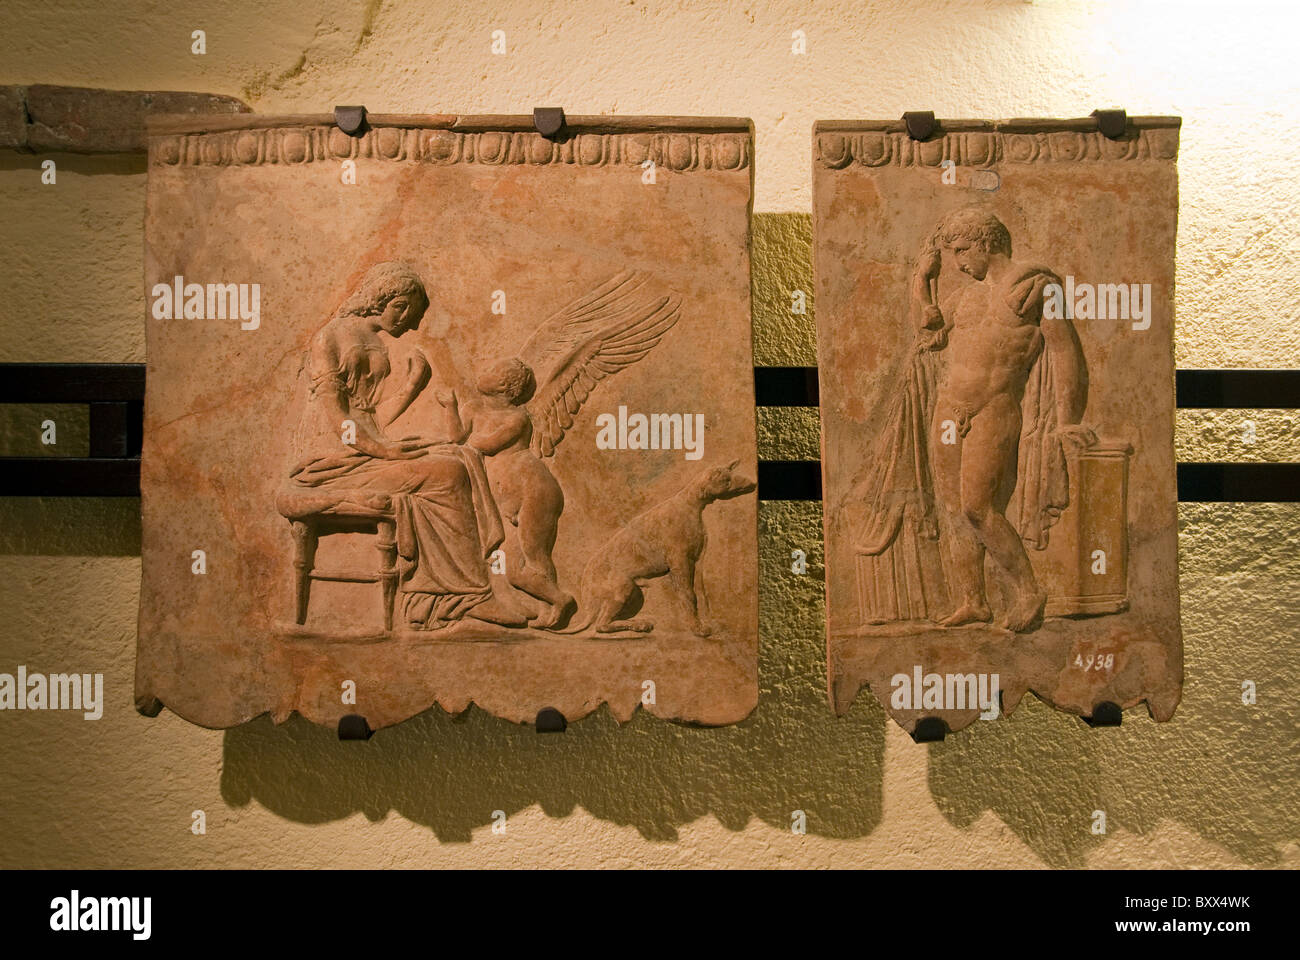 Ancient Roman bas relief panels in the archaeological museum in Sarteano, Tuscany Stock Photo